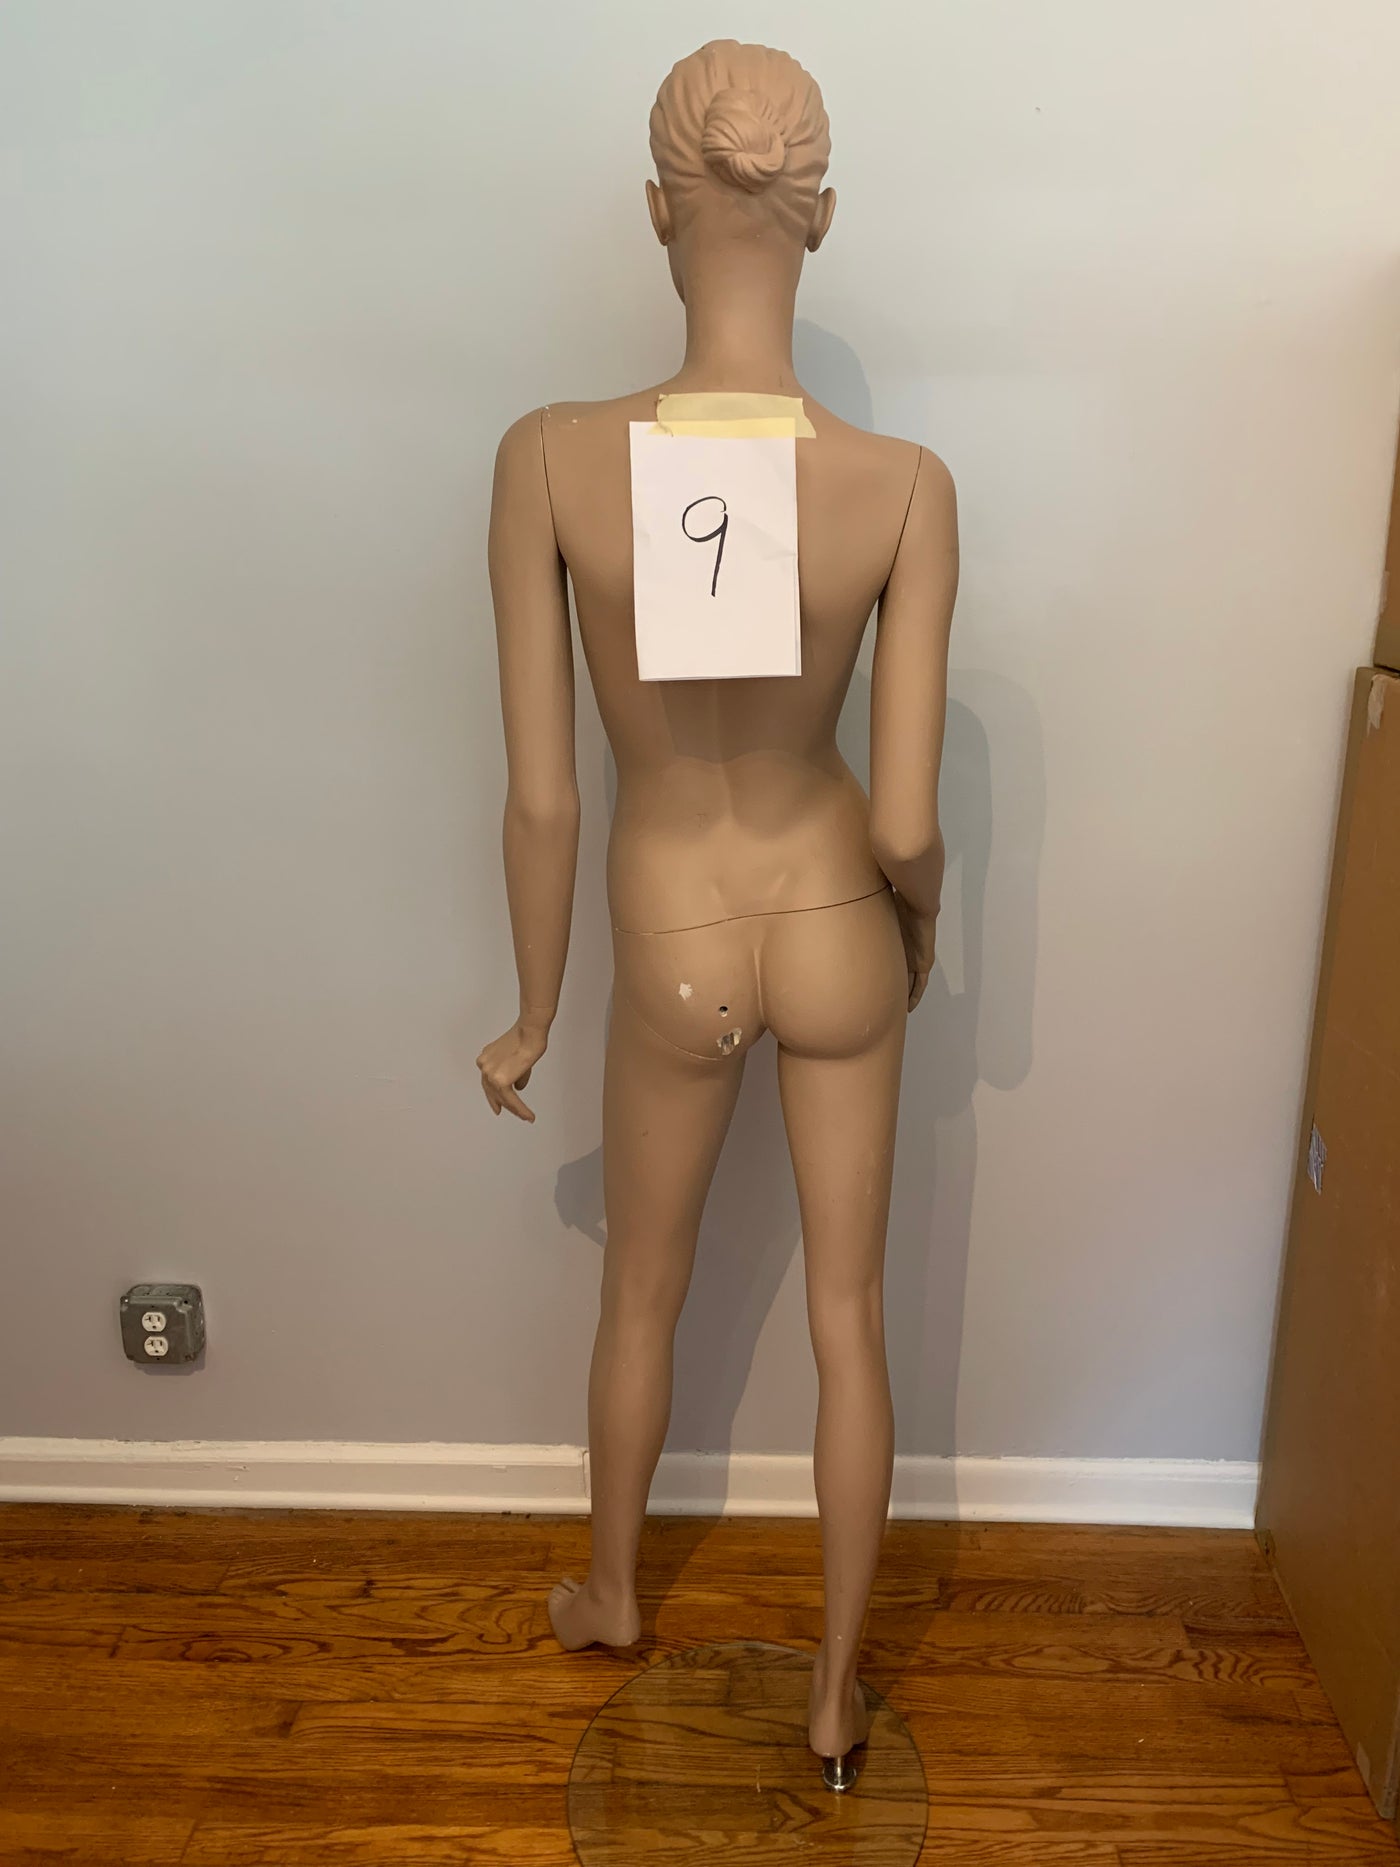 Used Rootstein Female Mannequin #9